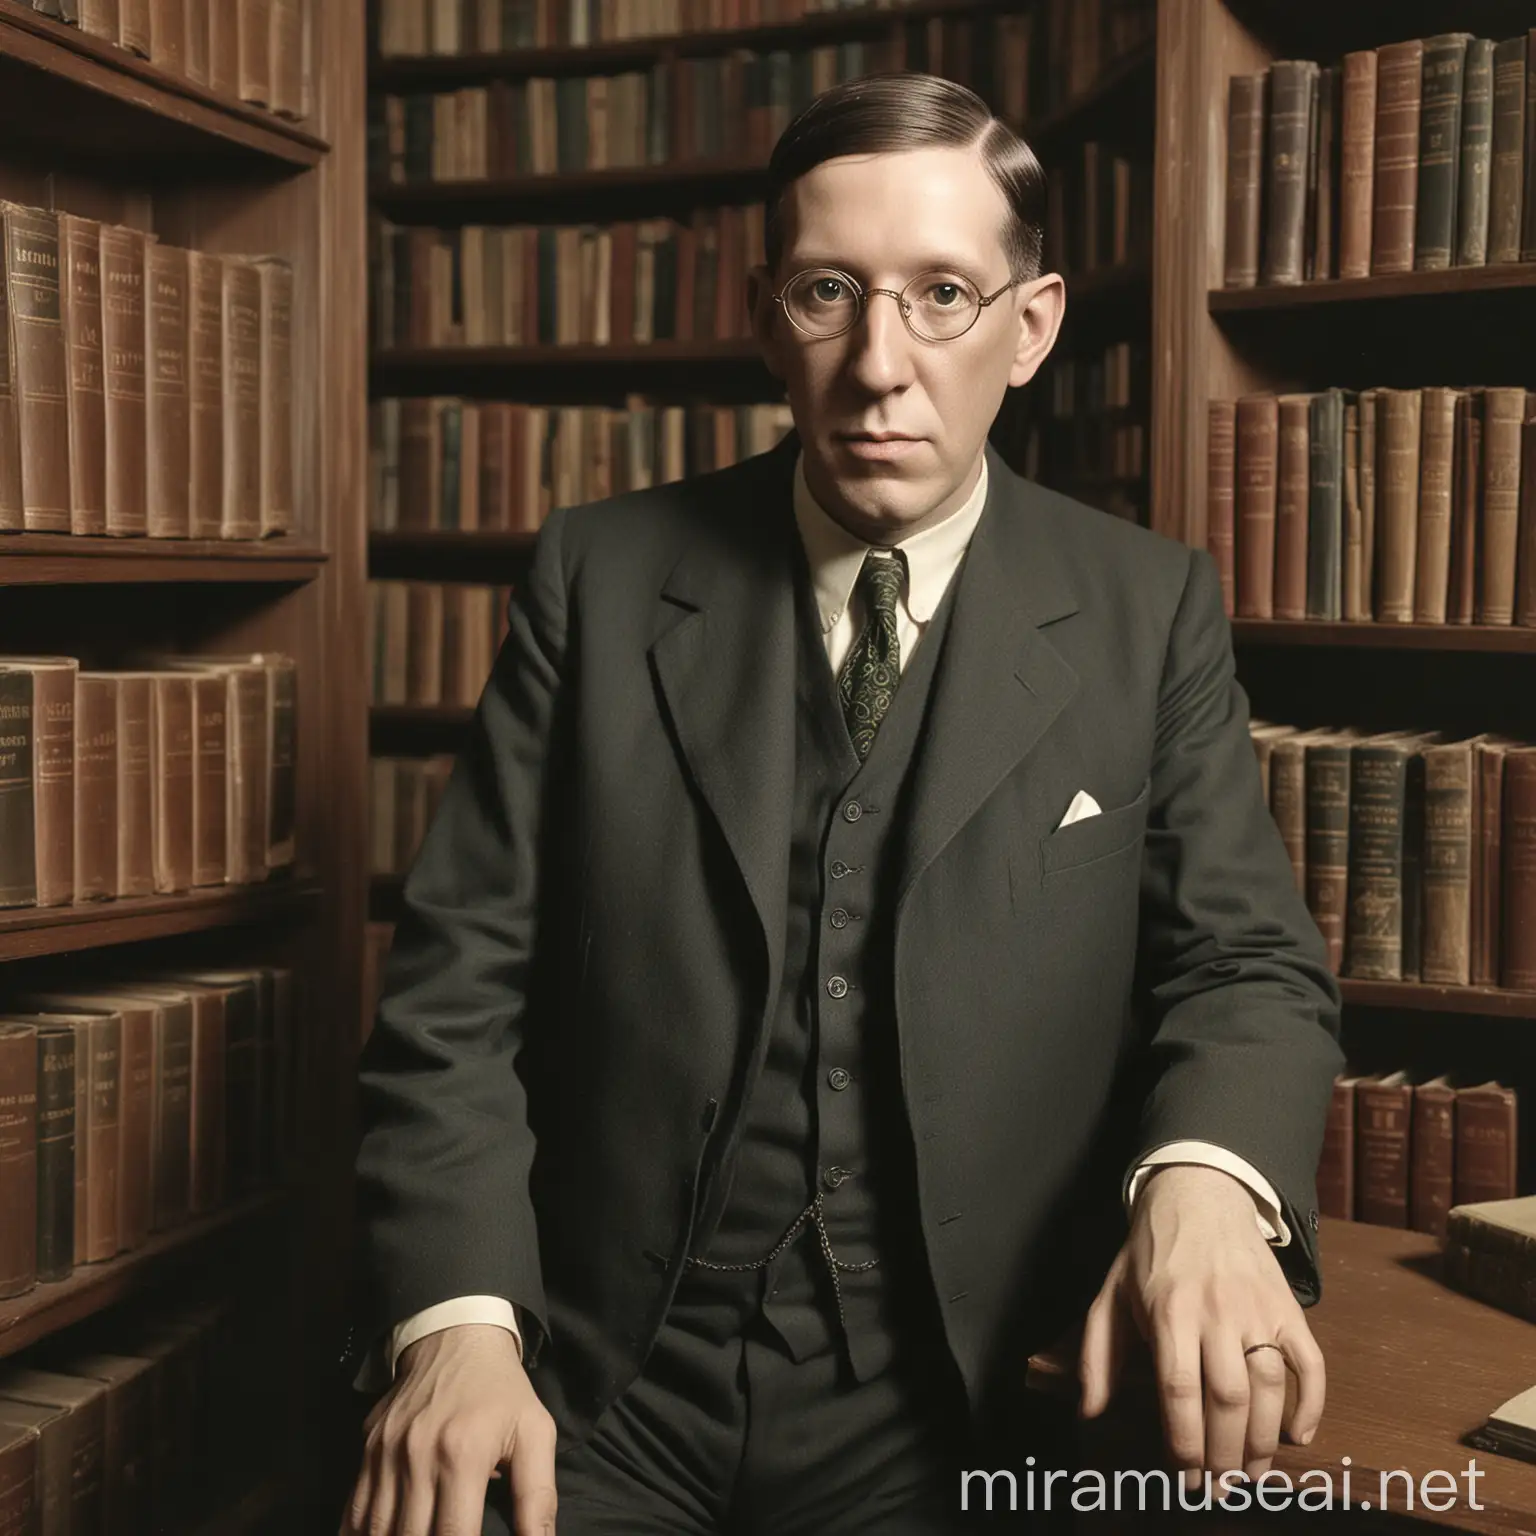 Howard Philips Lovecraft in 1920s Attire Amidst Vintage Library Ambiance